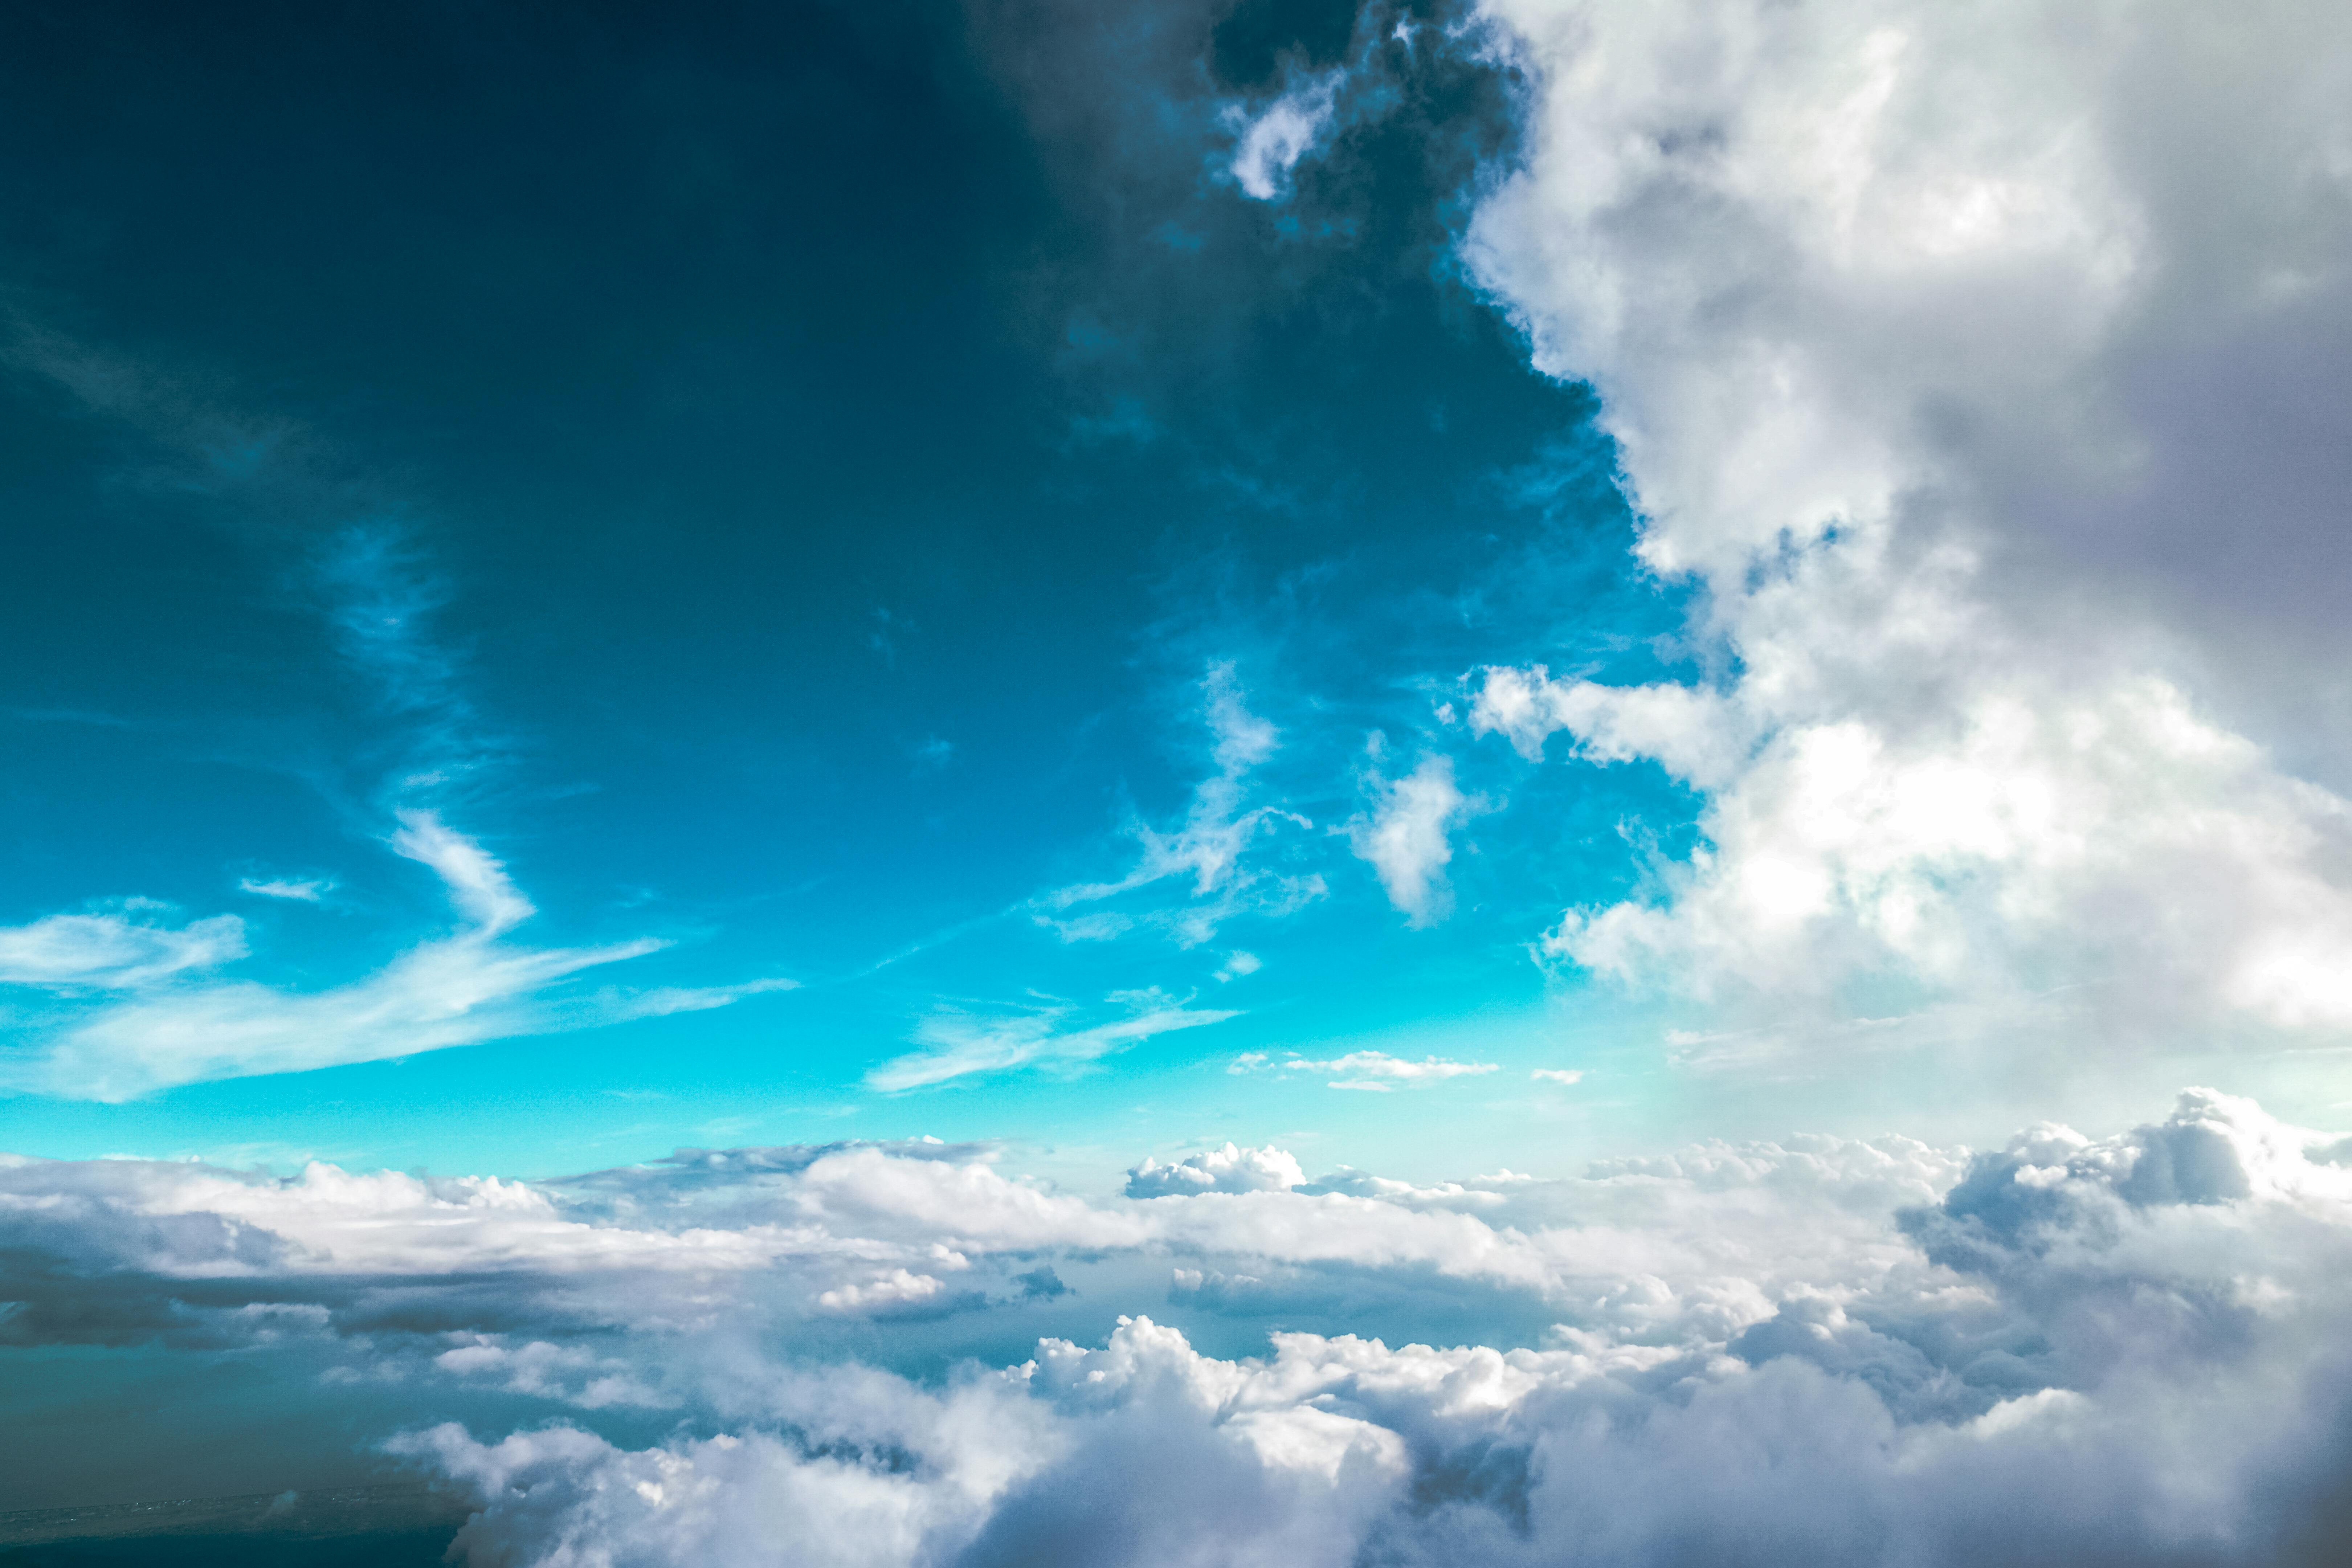 soft clouds, Free stock photos - Rgbstock - Free stock images, Ayla87